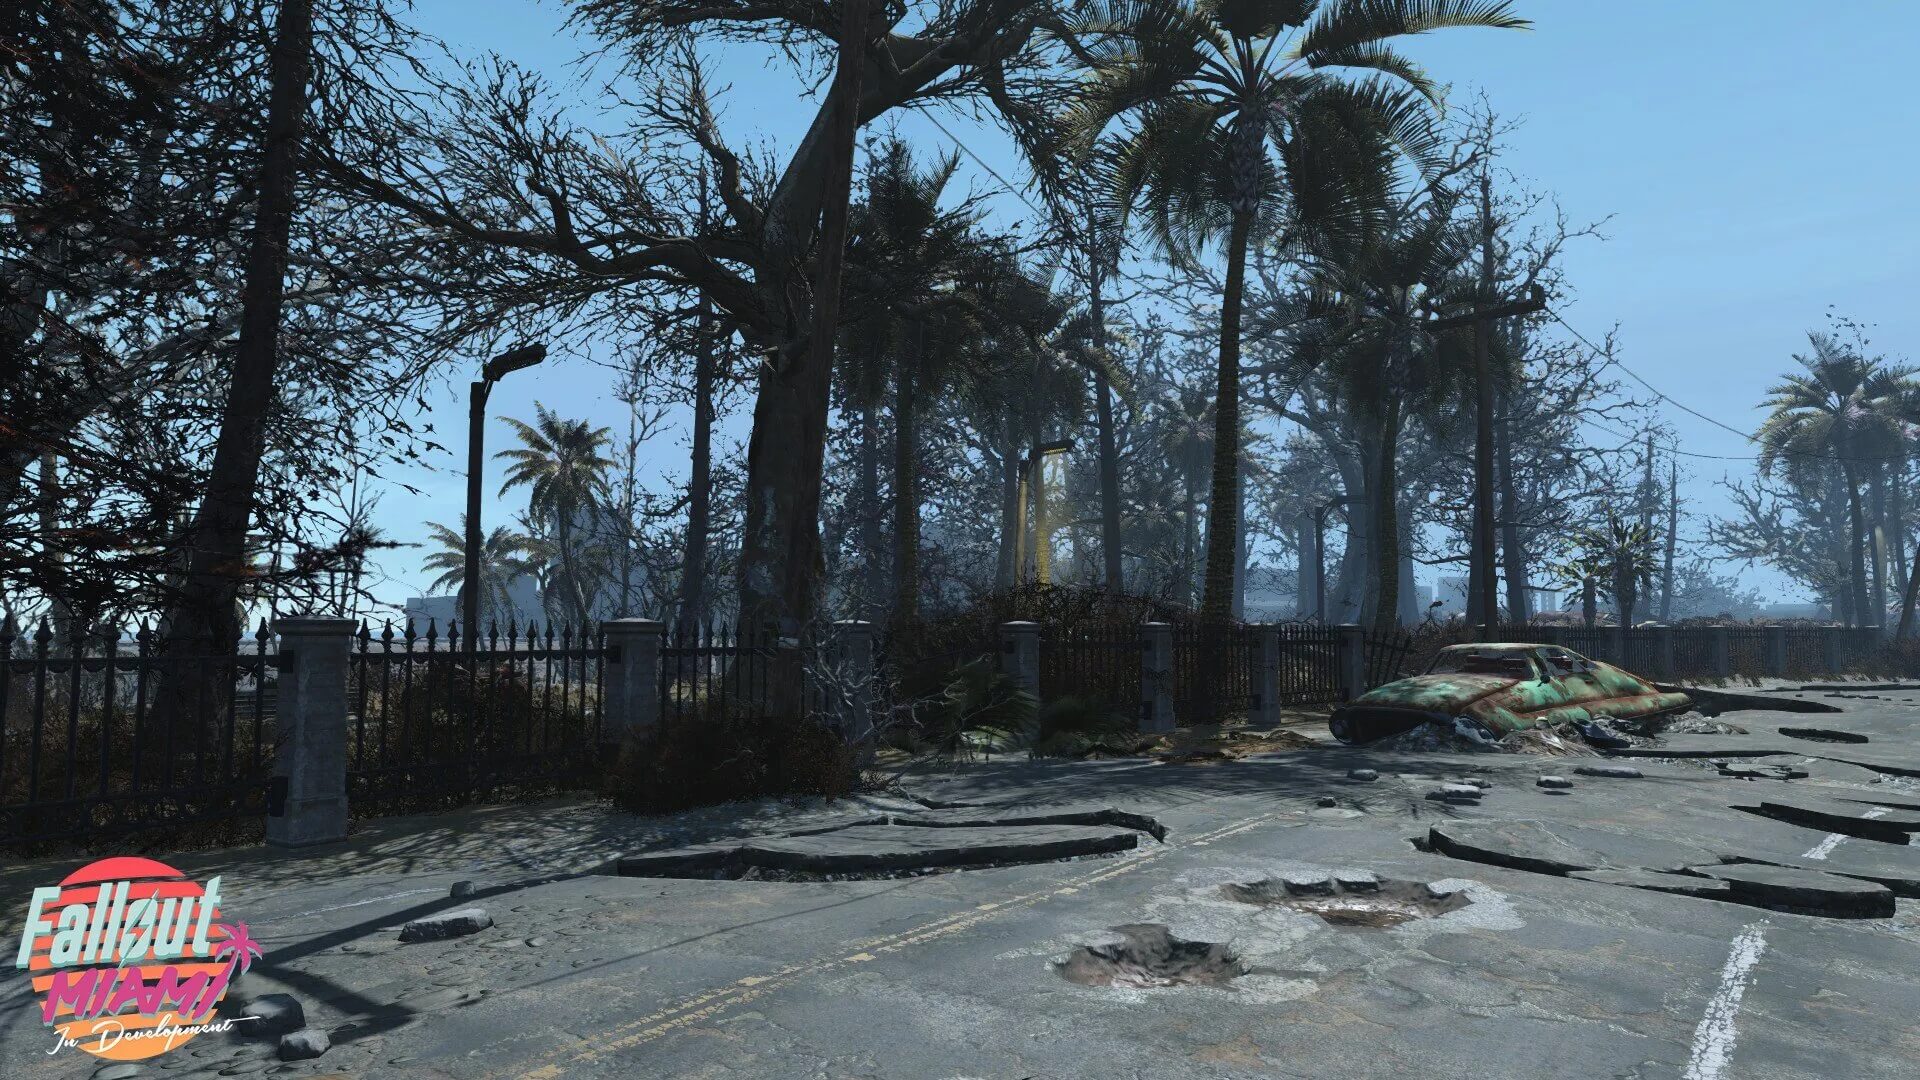 Fallout Miami, DLC-sized expansion mod for Fallout 4, gets new in-engine trailer